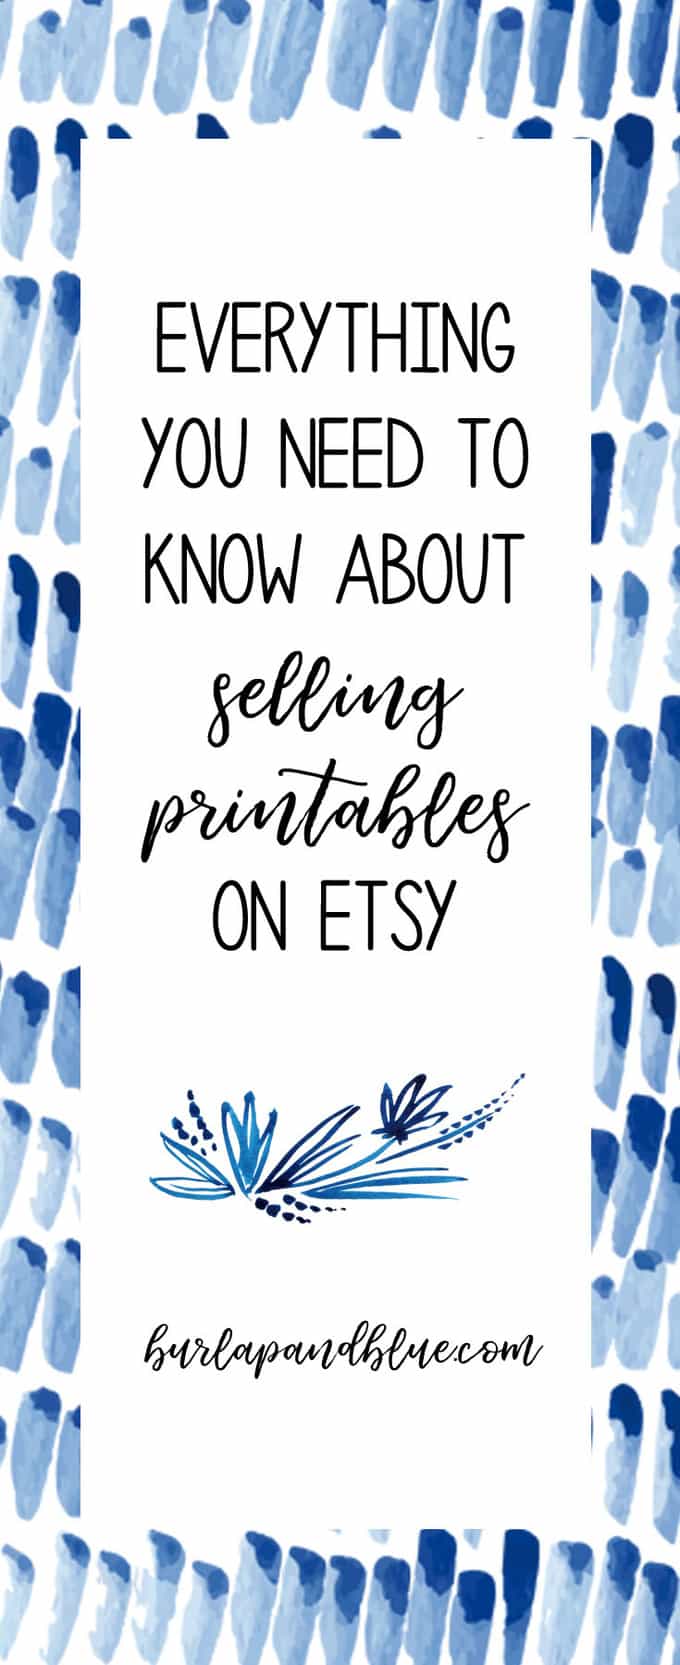 SELL ON ETSY HOW TO SELL PRINTABLES ON ETSY 